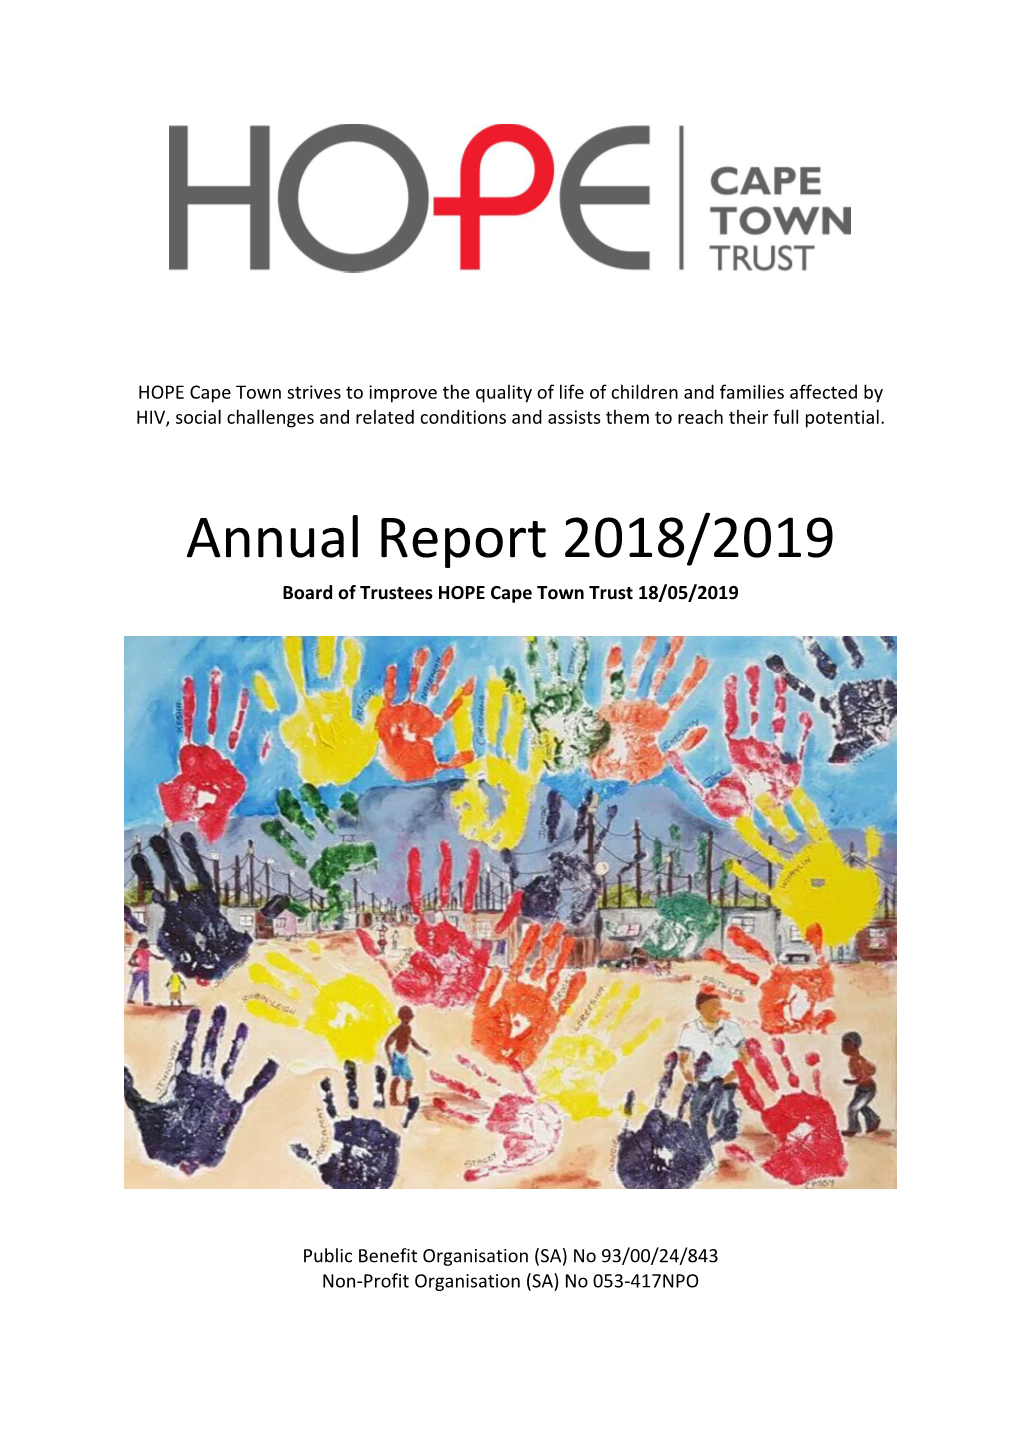 Annual Report 2018/2019 Board of Trustees HOPE Cape Town Trust 18/05/2019